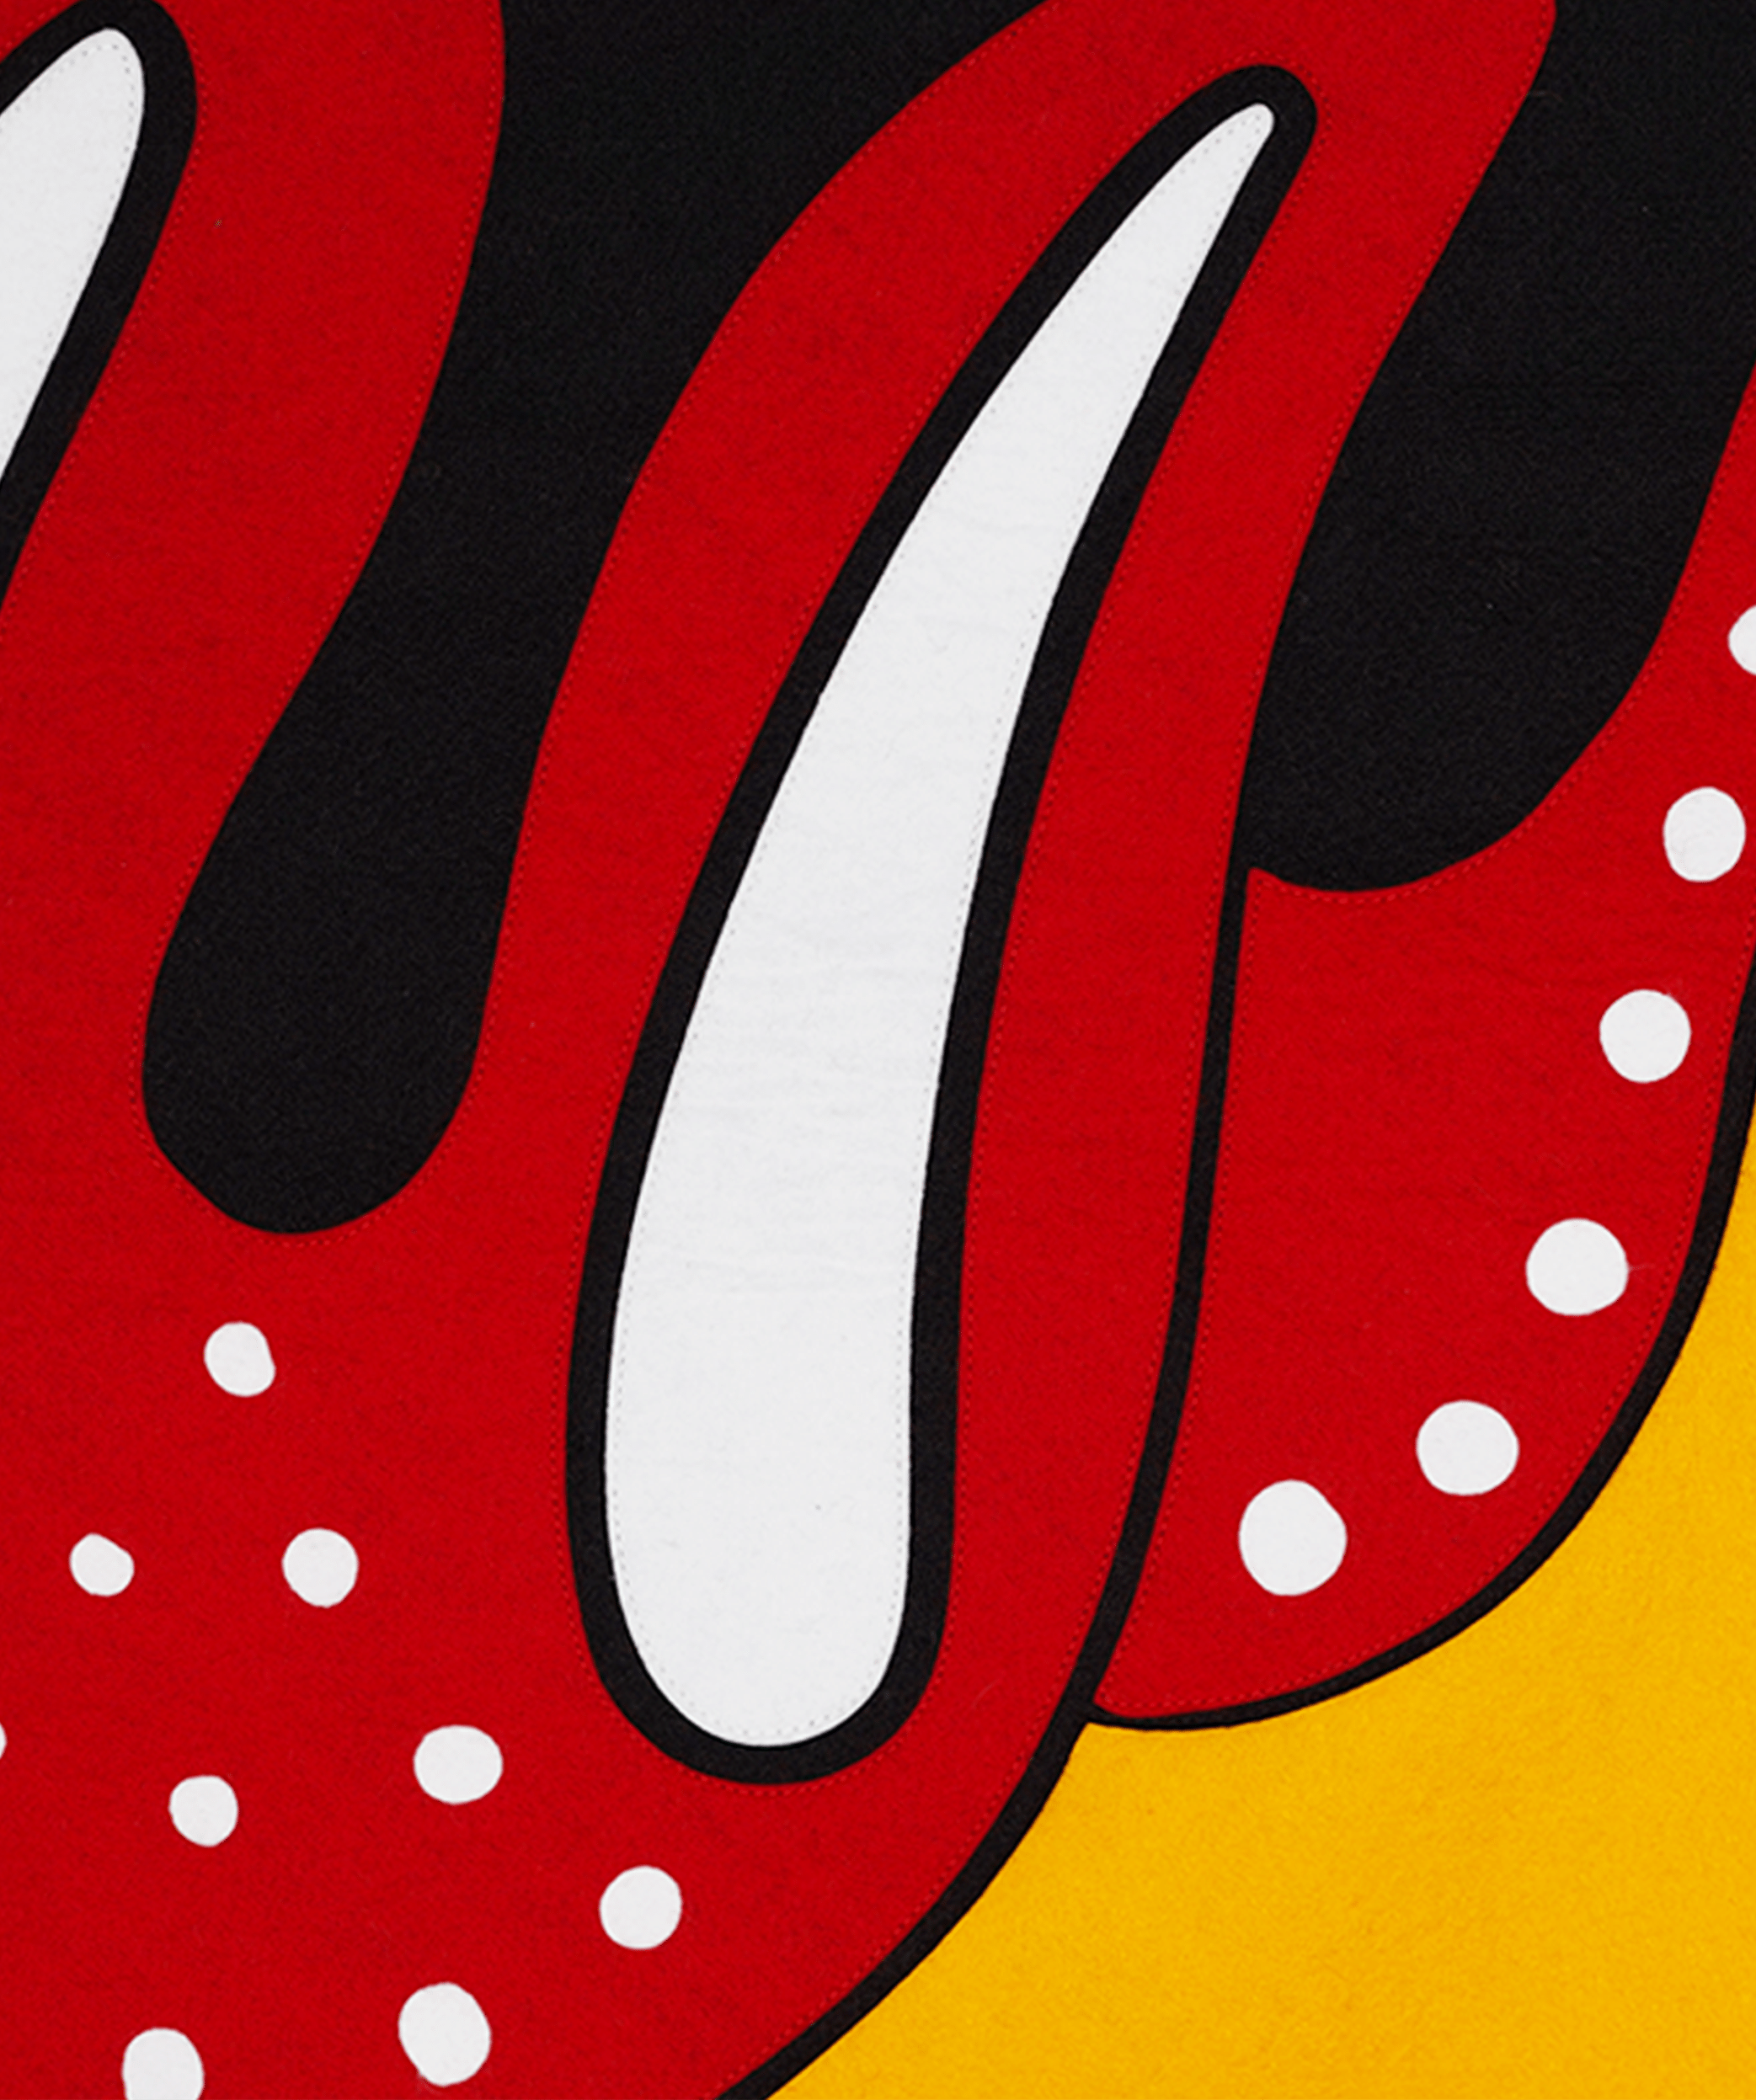 A detail of a painting by Hunt Slonem, featuring a bright, abstract composition in red, yellow, black, and white. - Rolling Stones